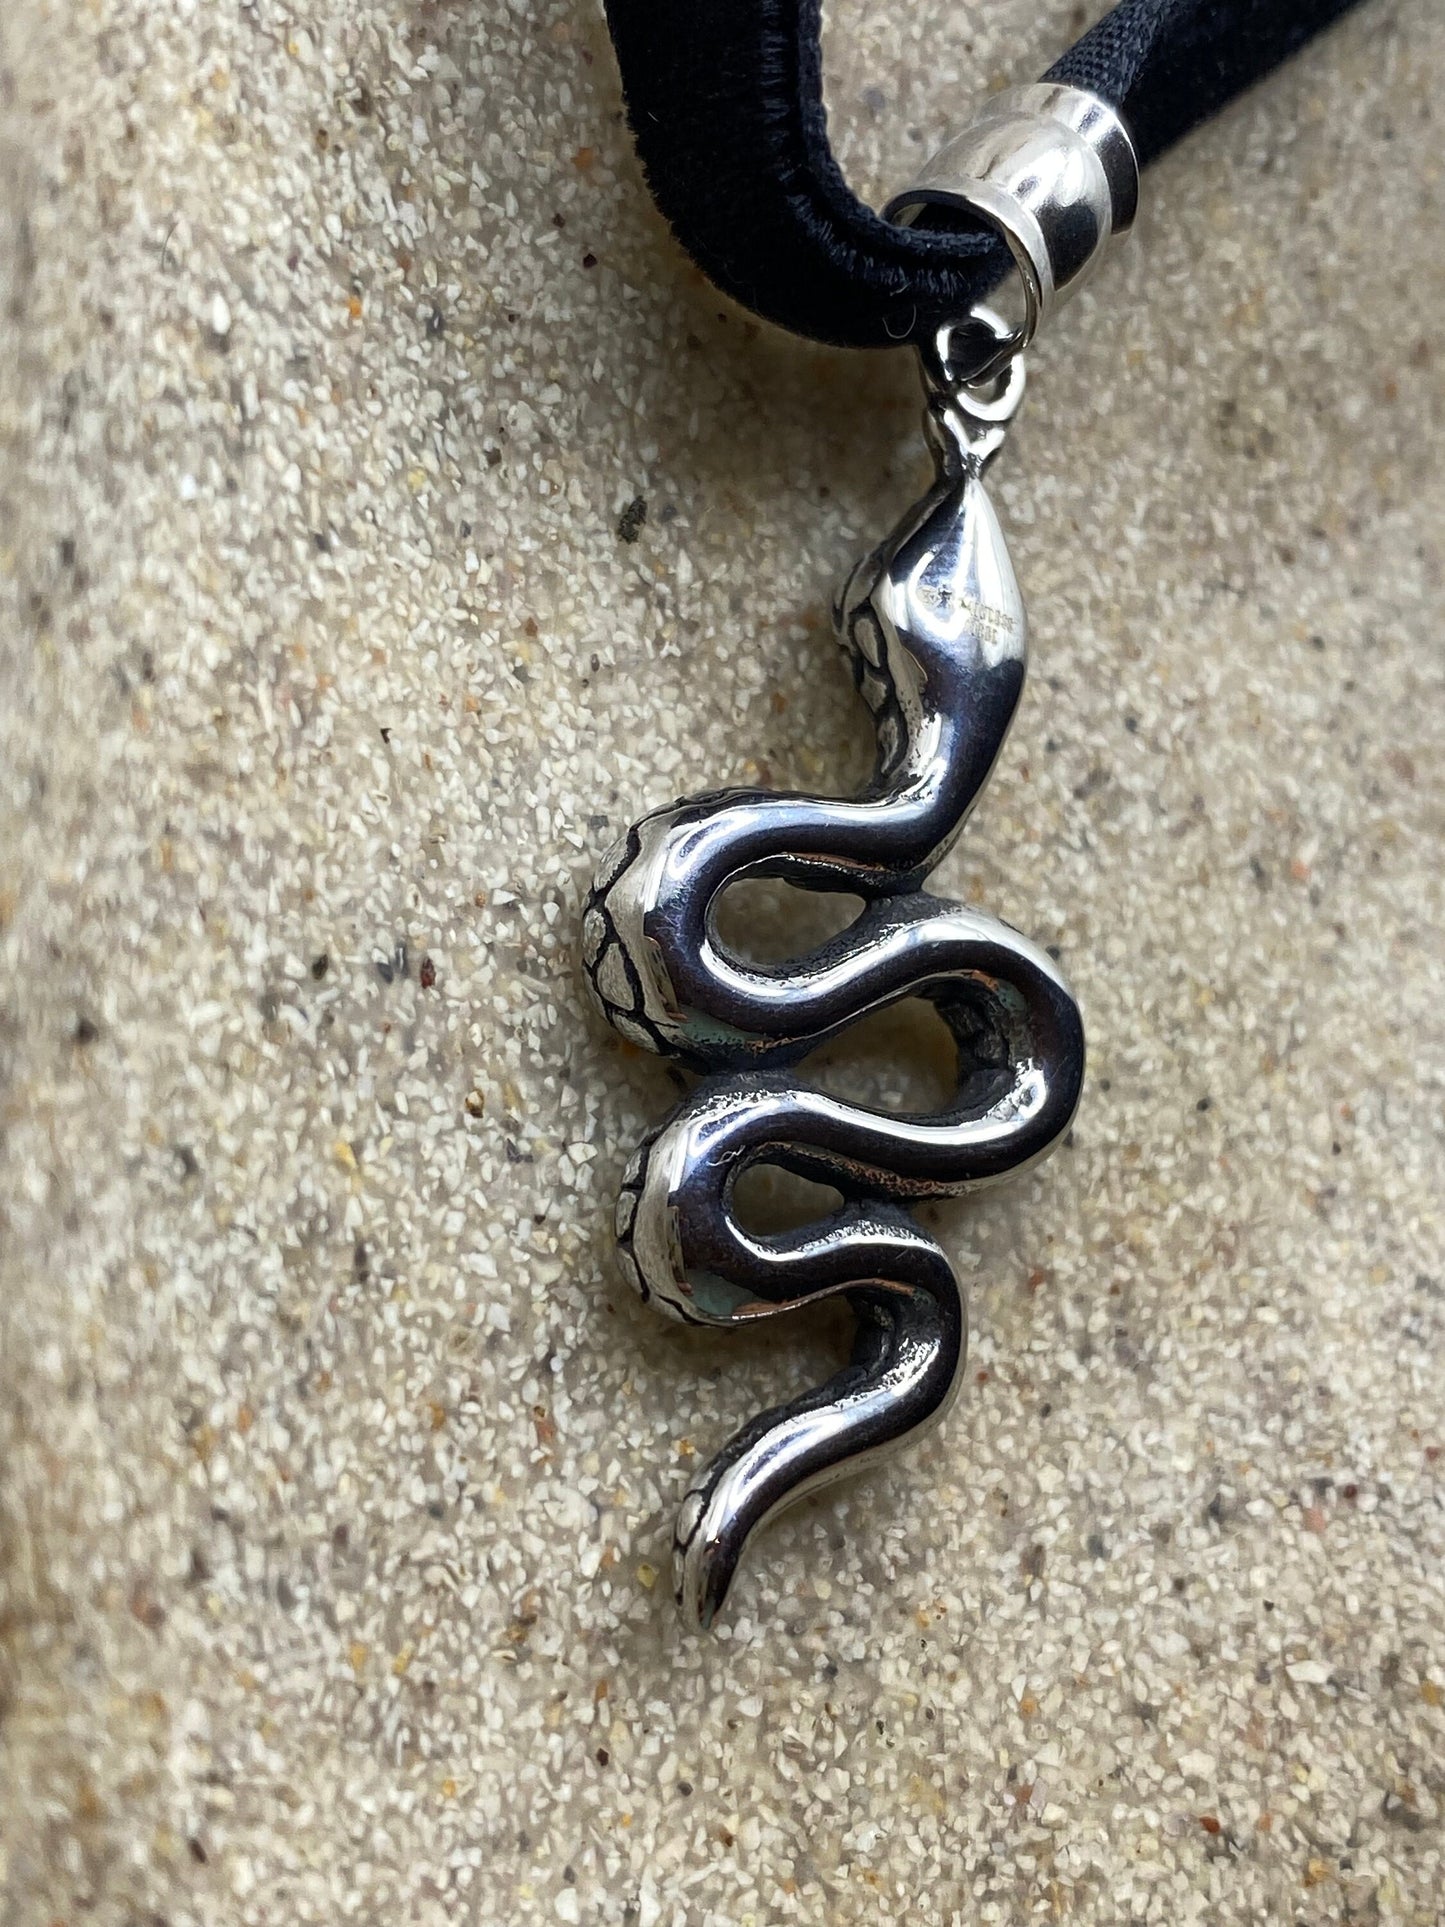 Vintage Stainless Steel Snake Choker Necklace